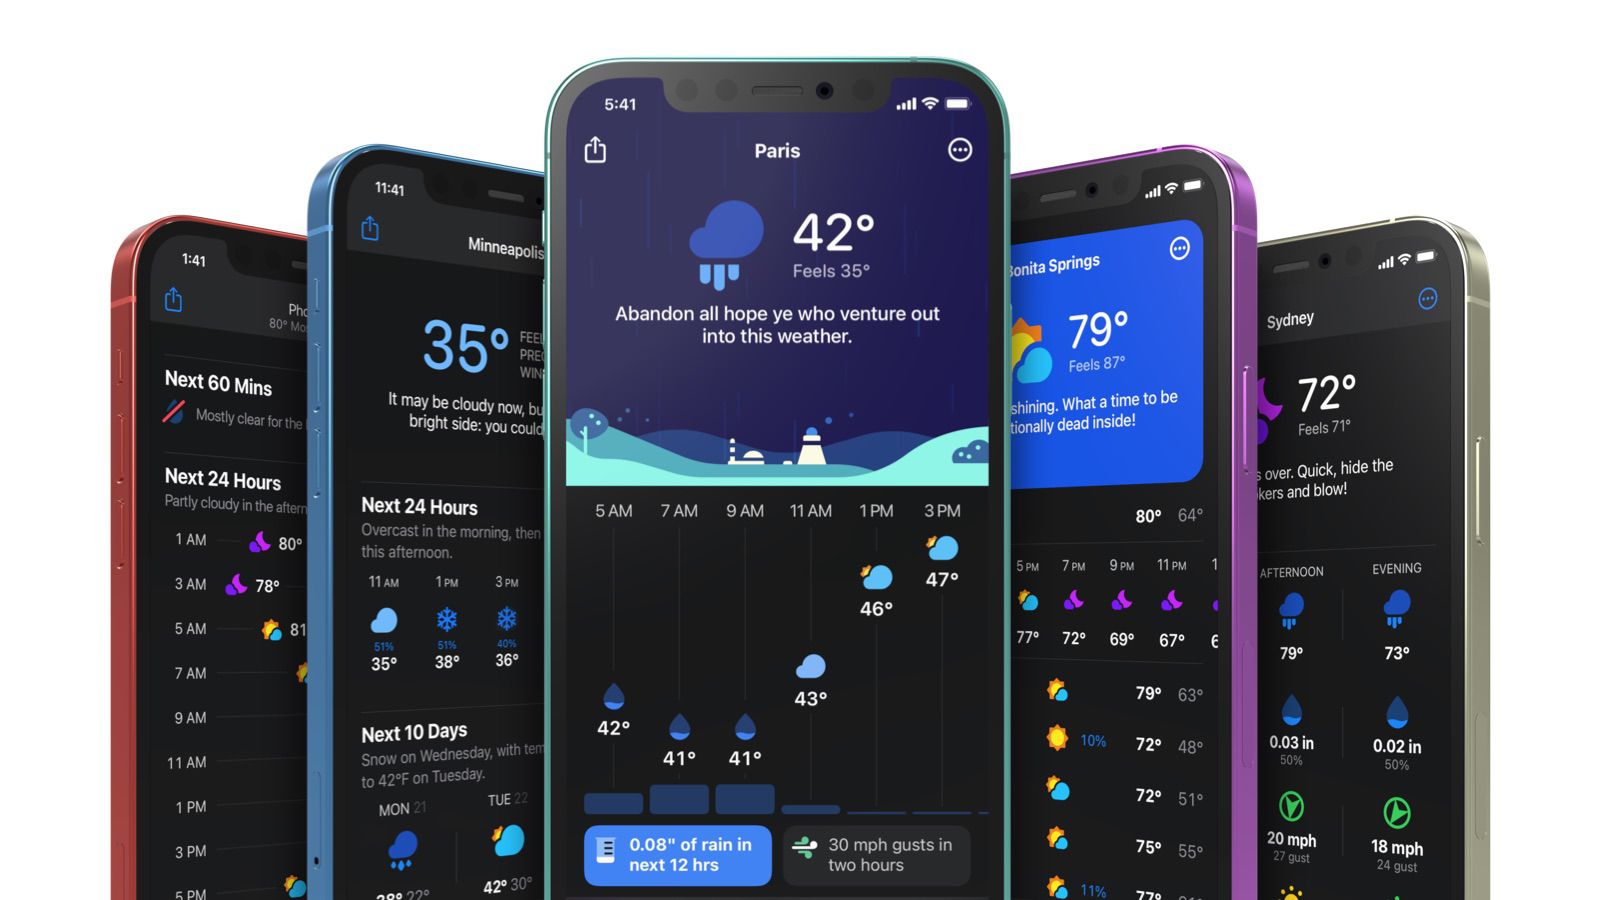 CARROT Weather 5.0 launches with a fresh design, snarkier dialogue and customization options